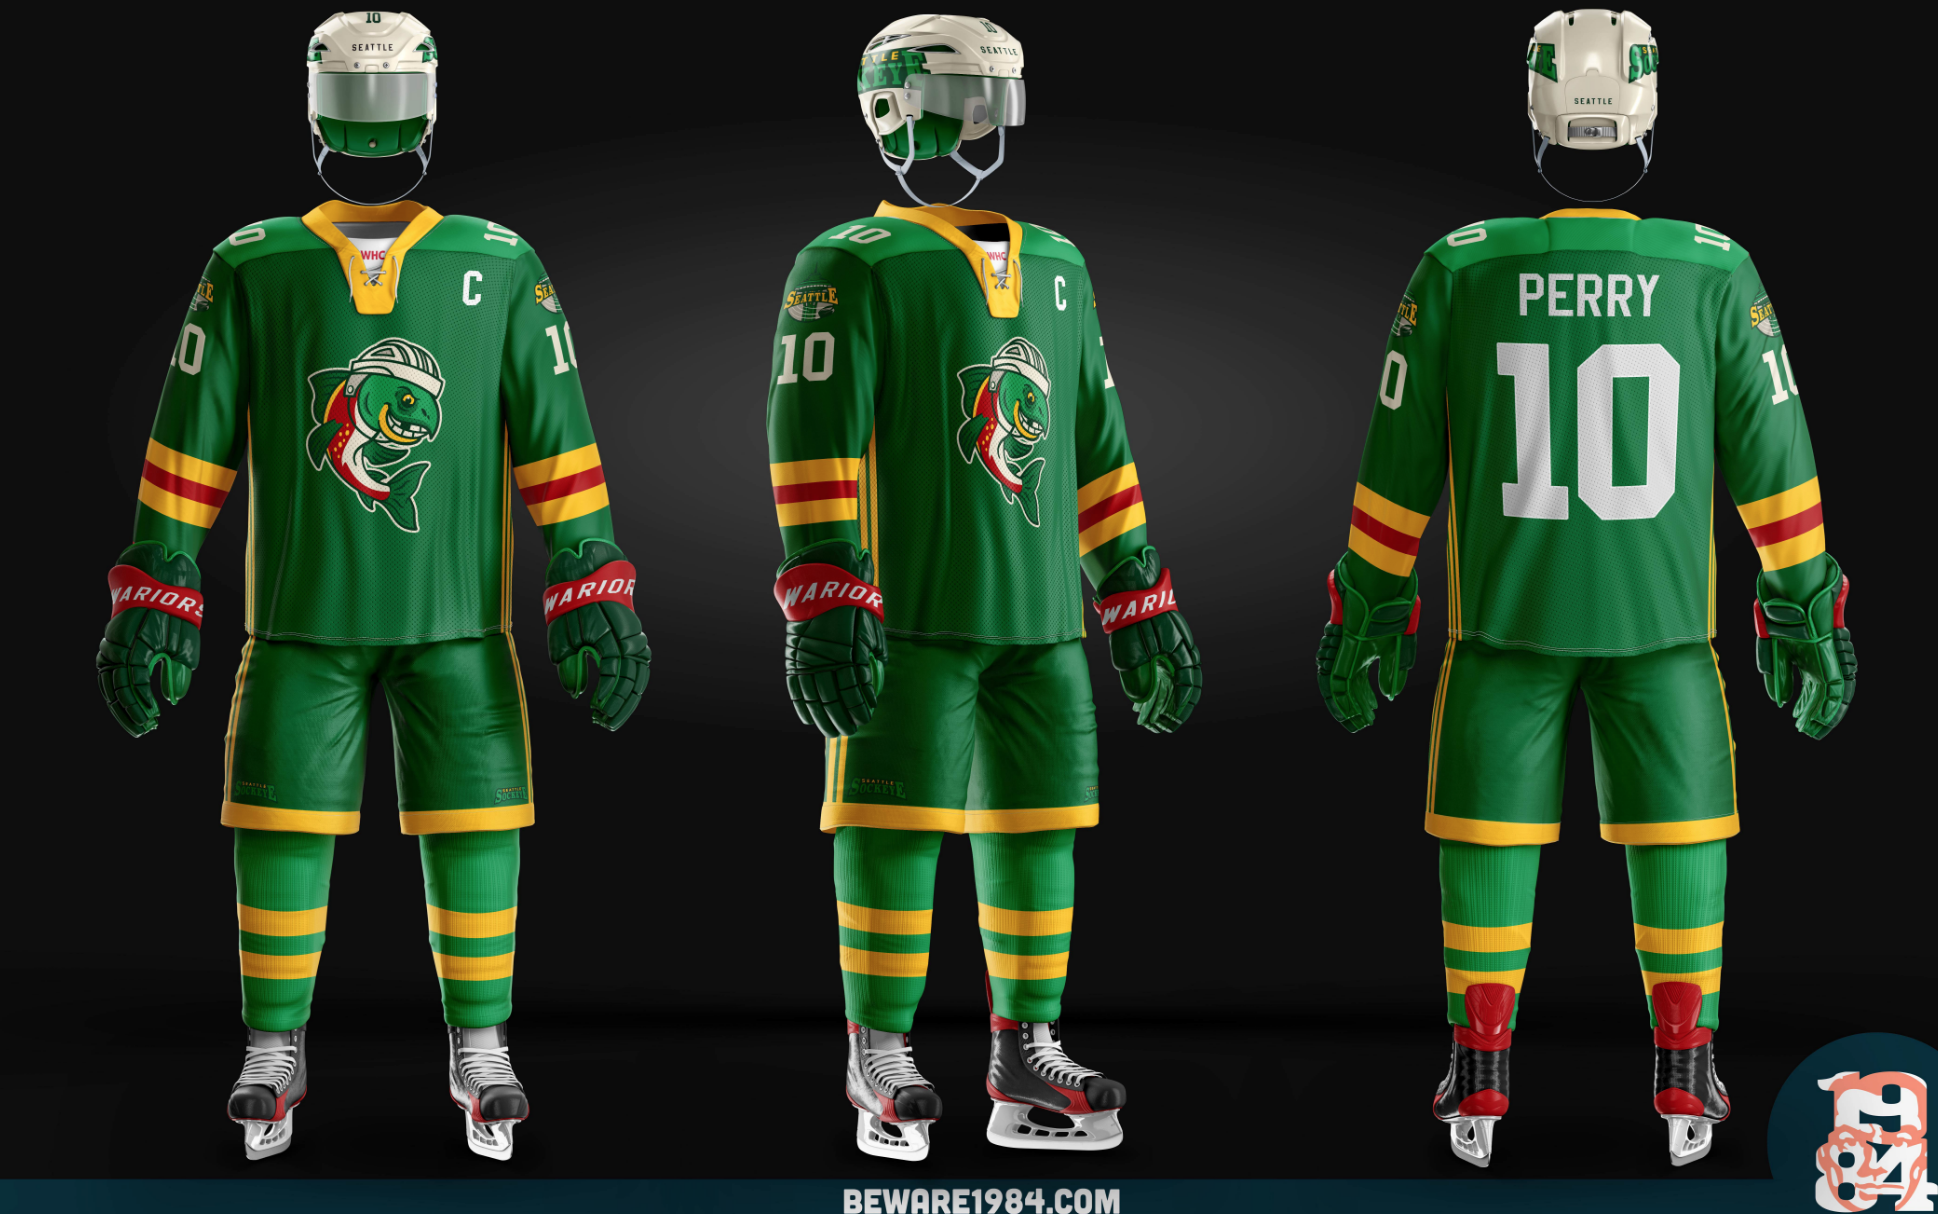 These concept jerseys for a Seattle 